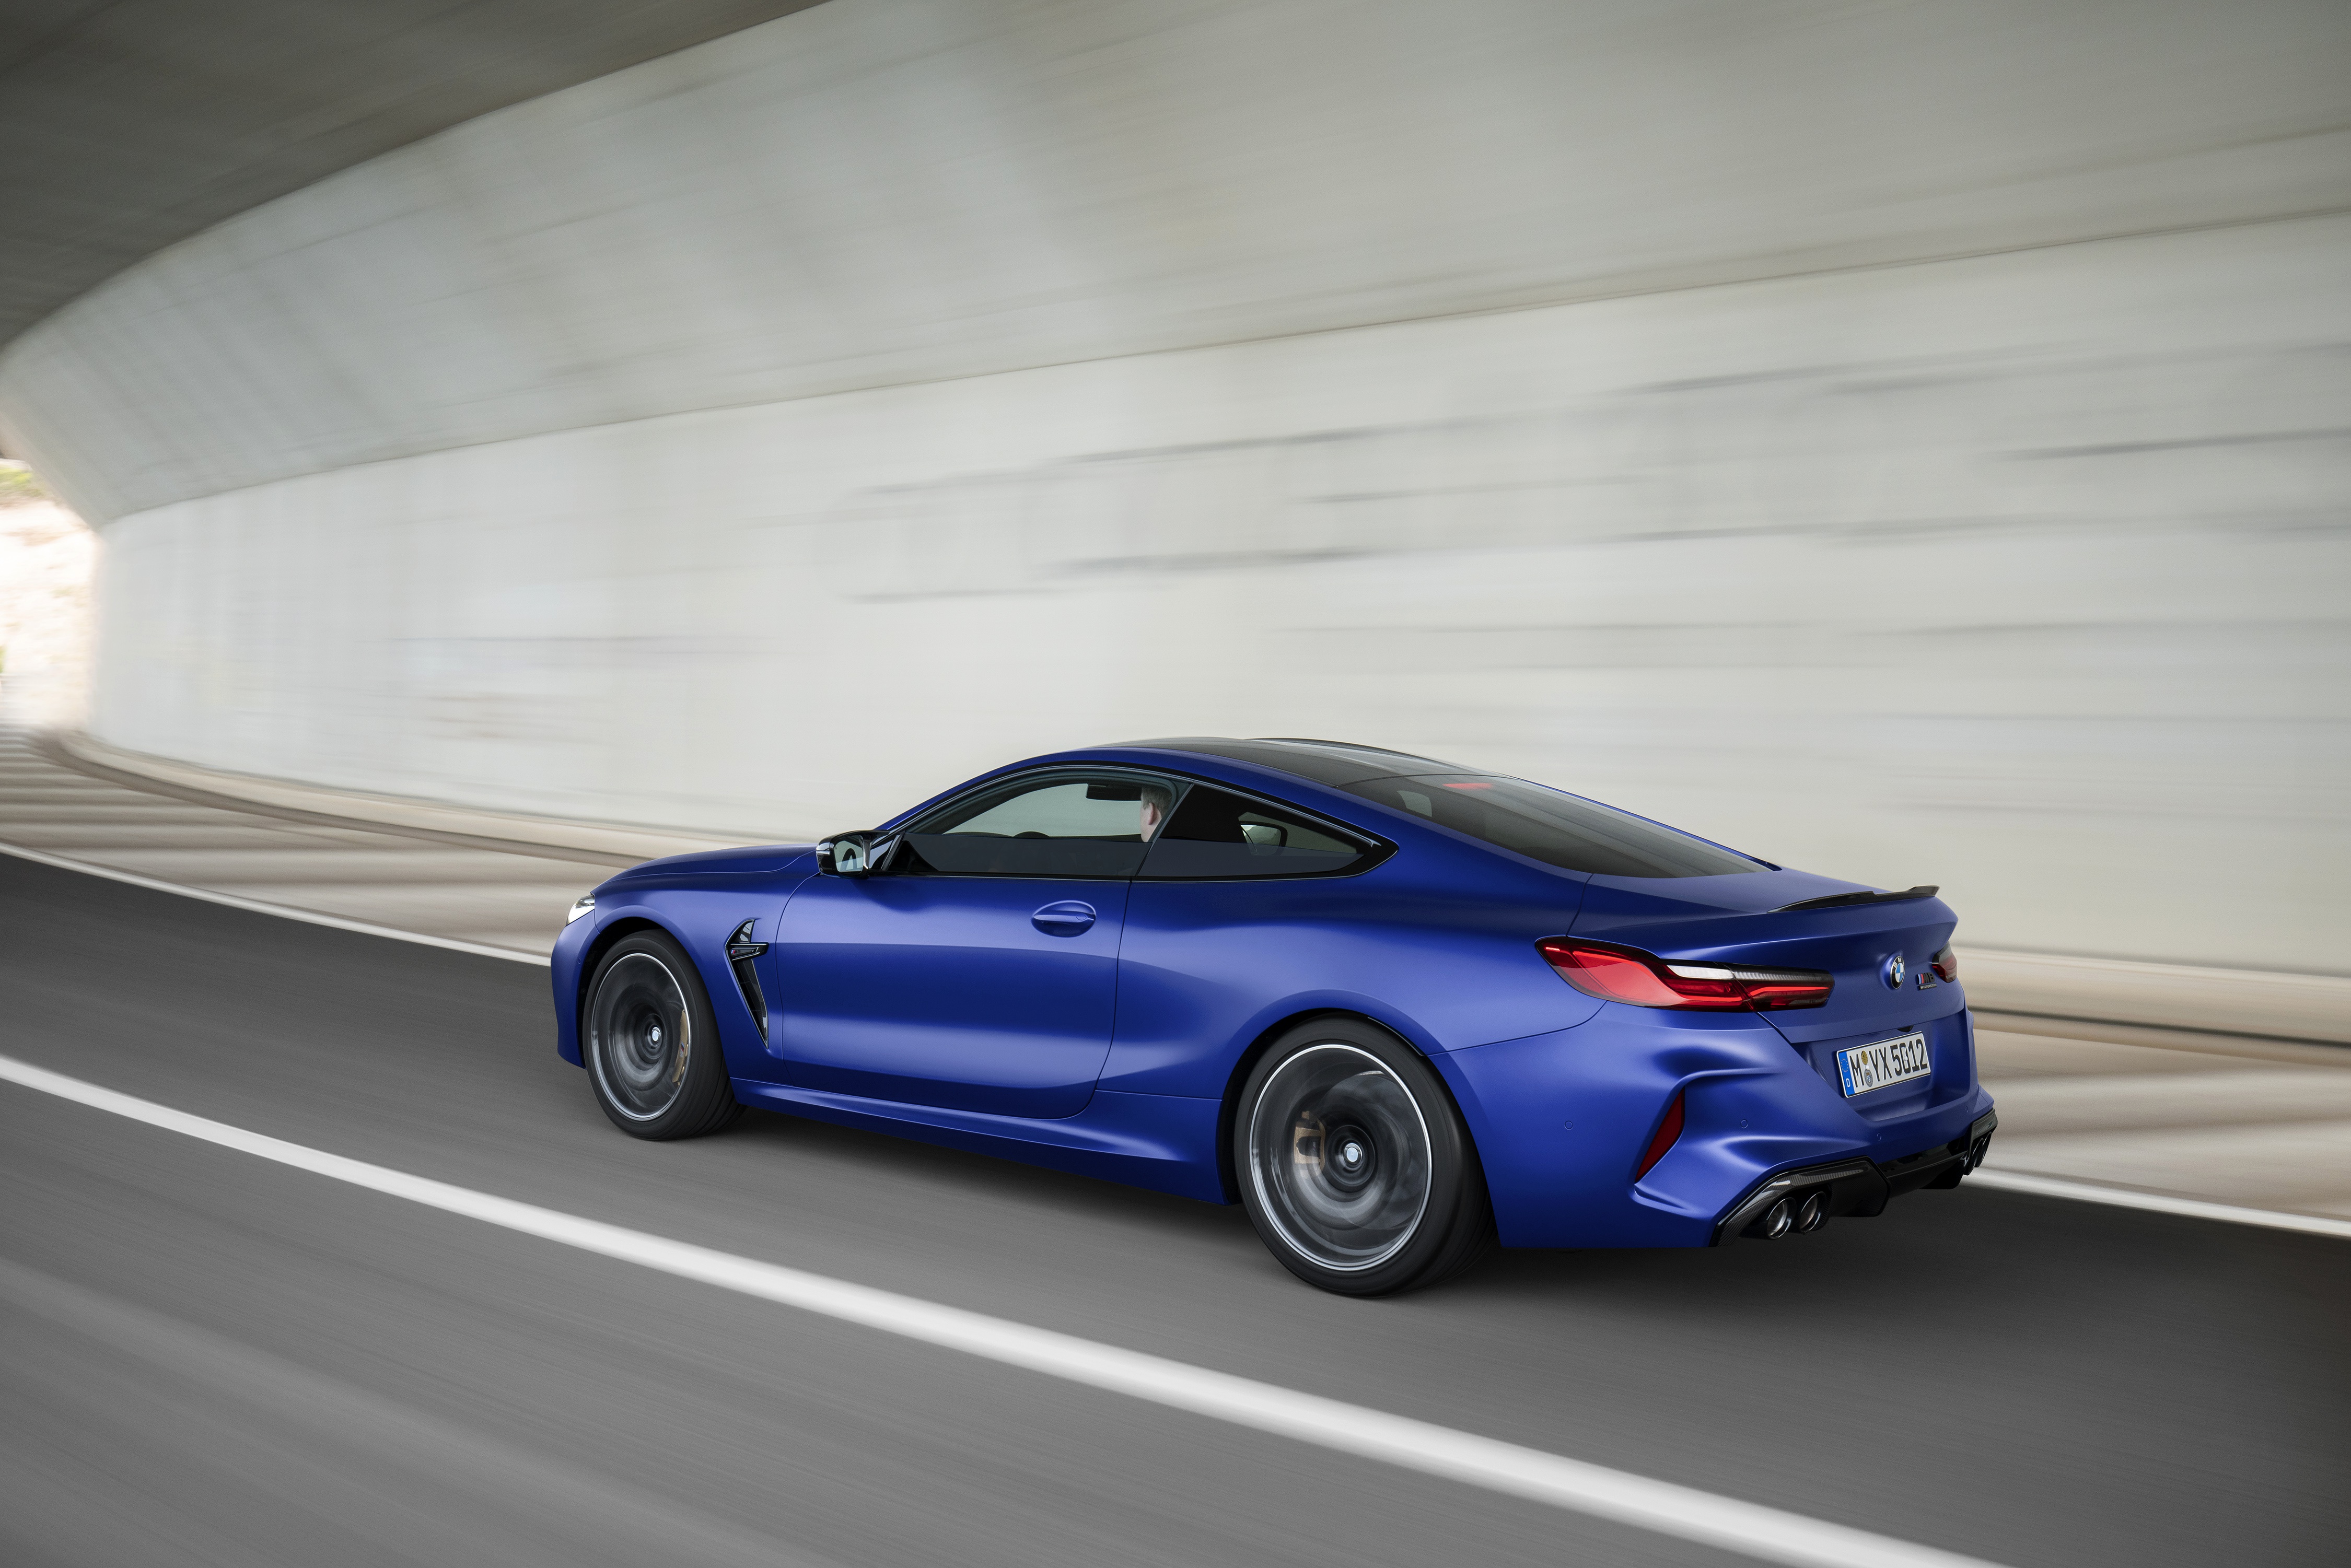 M 8 competition. BMW m8 Coupe. BMW m8 2019. BMW m8 Competition Coupe. Новая BMW m8 Coupe.